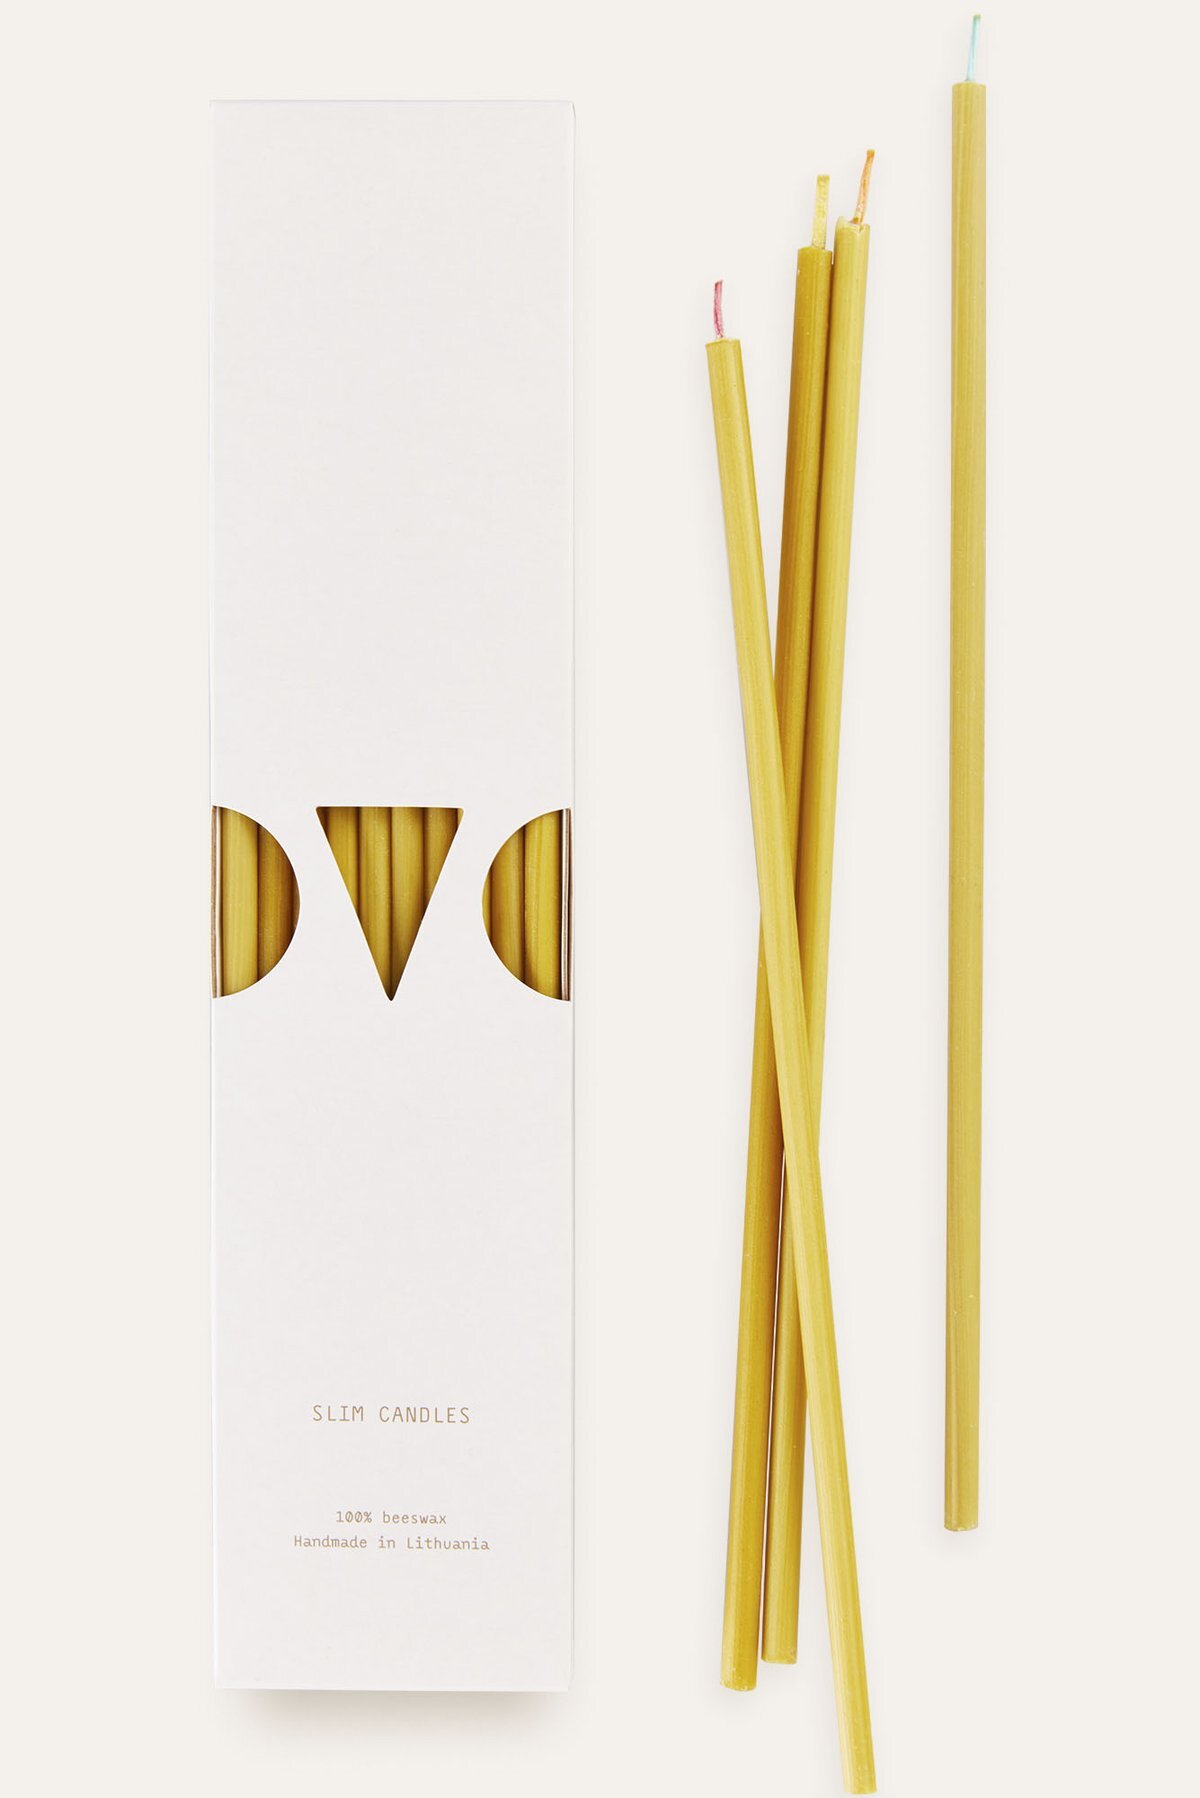   Slim candles  - Ovothings 